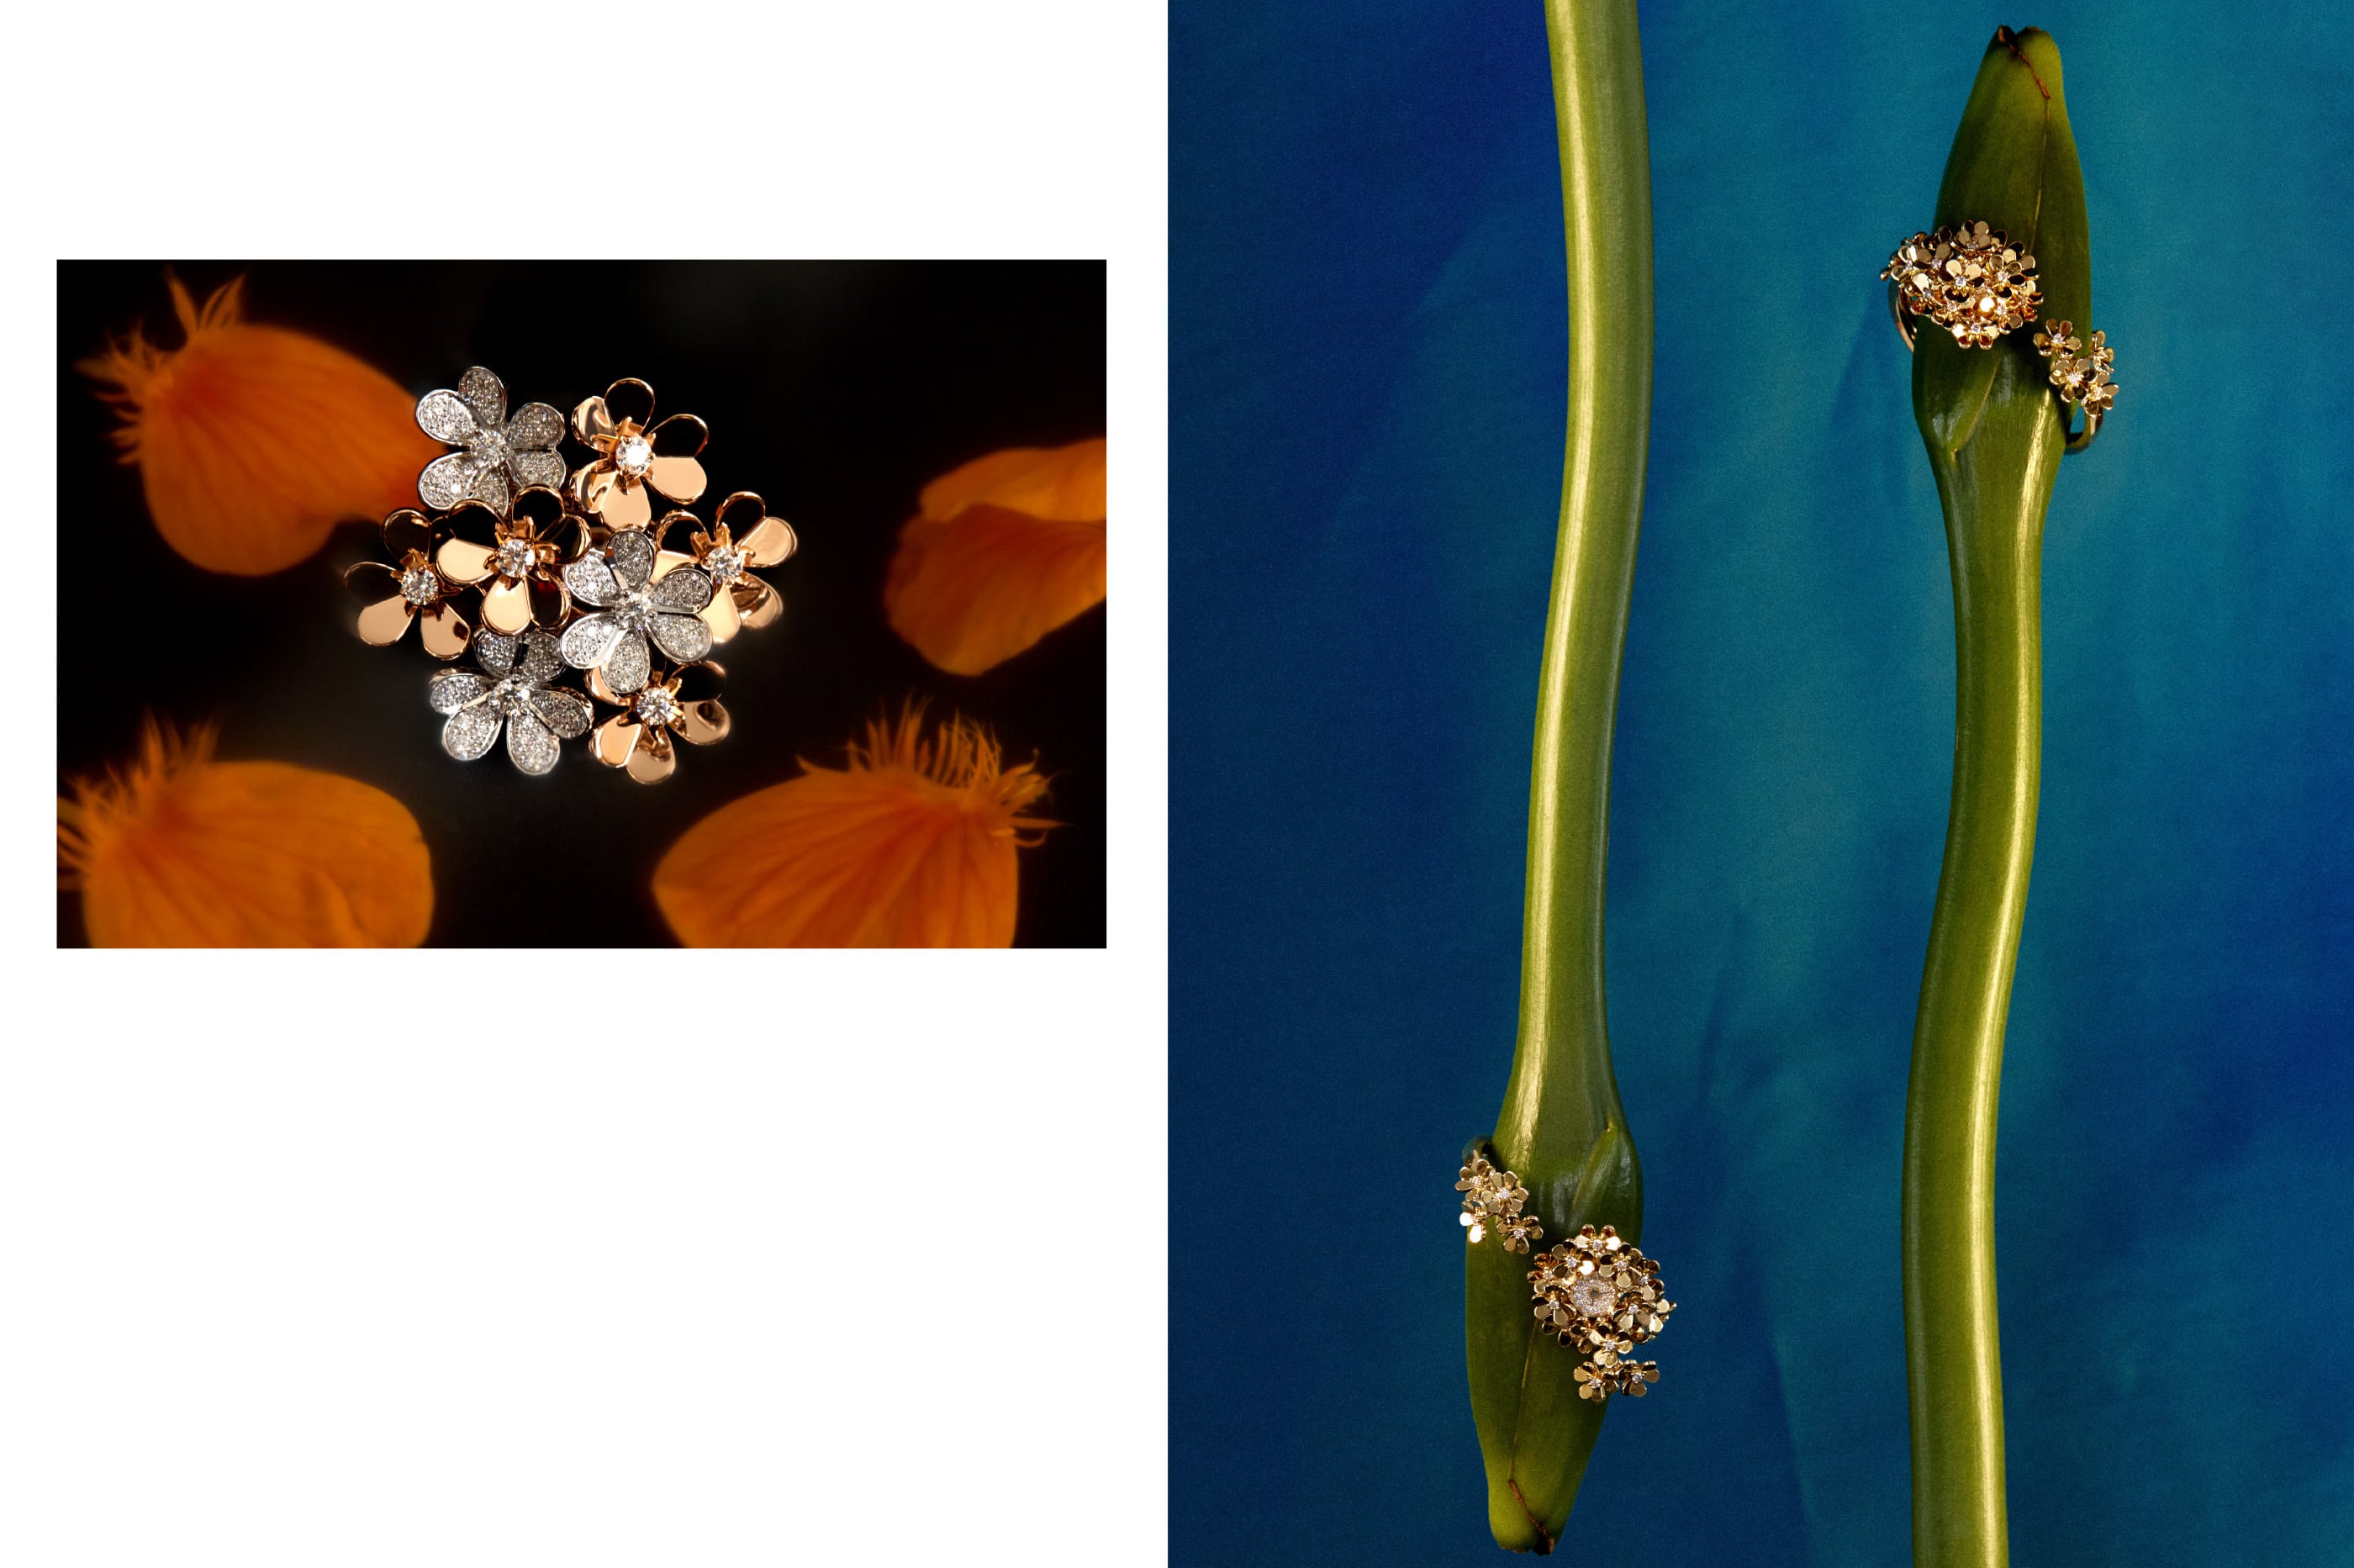 Van Cleef & Arpels' 'Frivole' collection ring and watches.